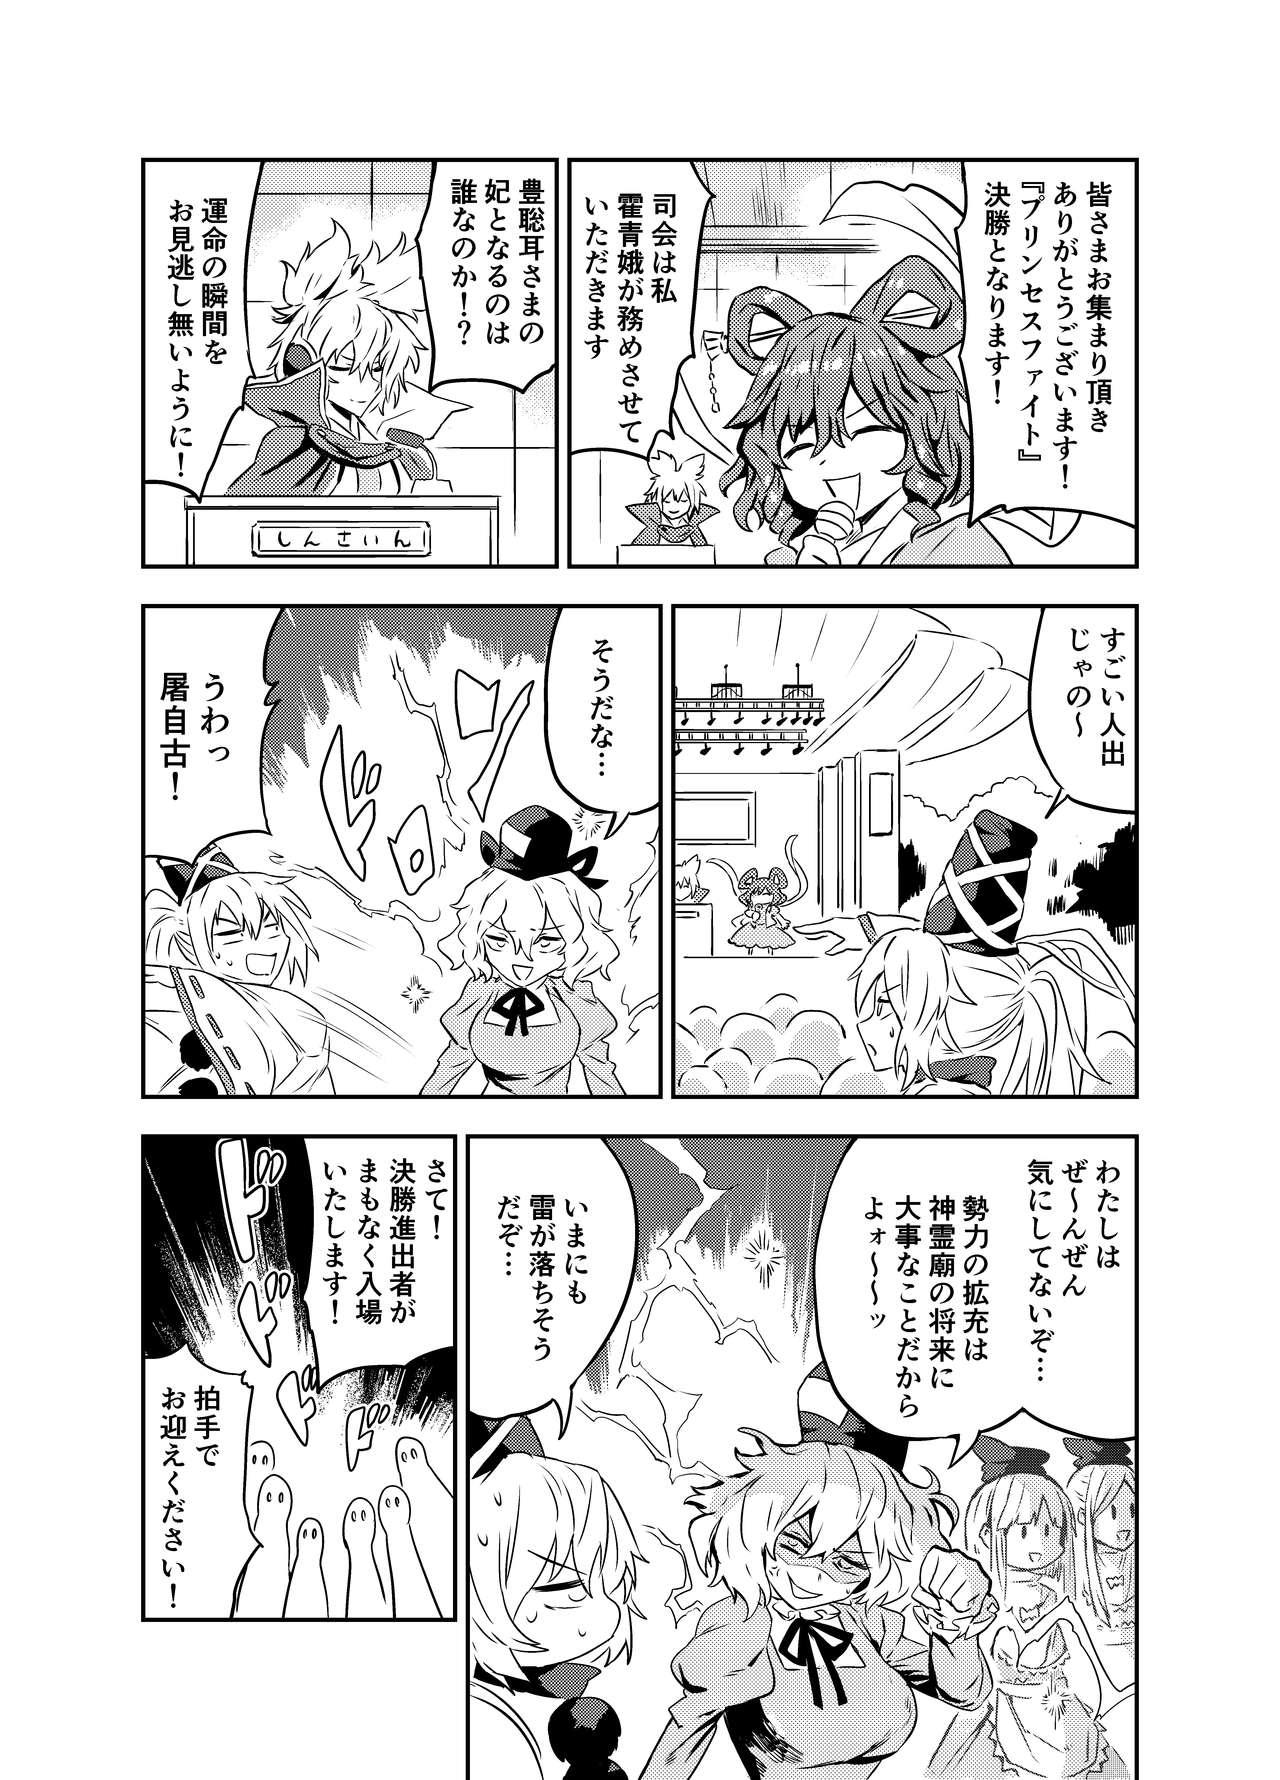 White Girl Princess Fight - Touhou project Time - Page 4